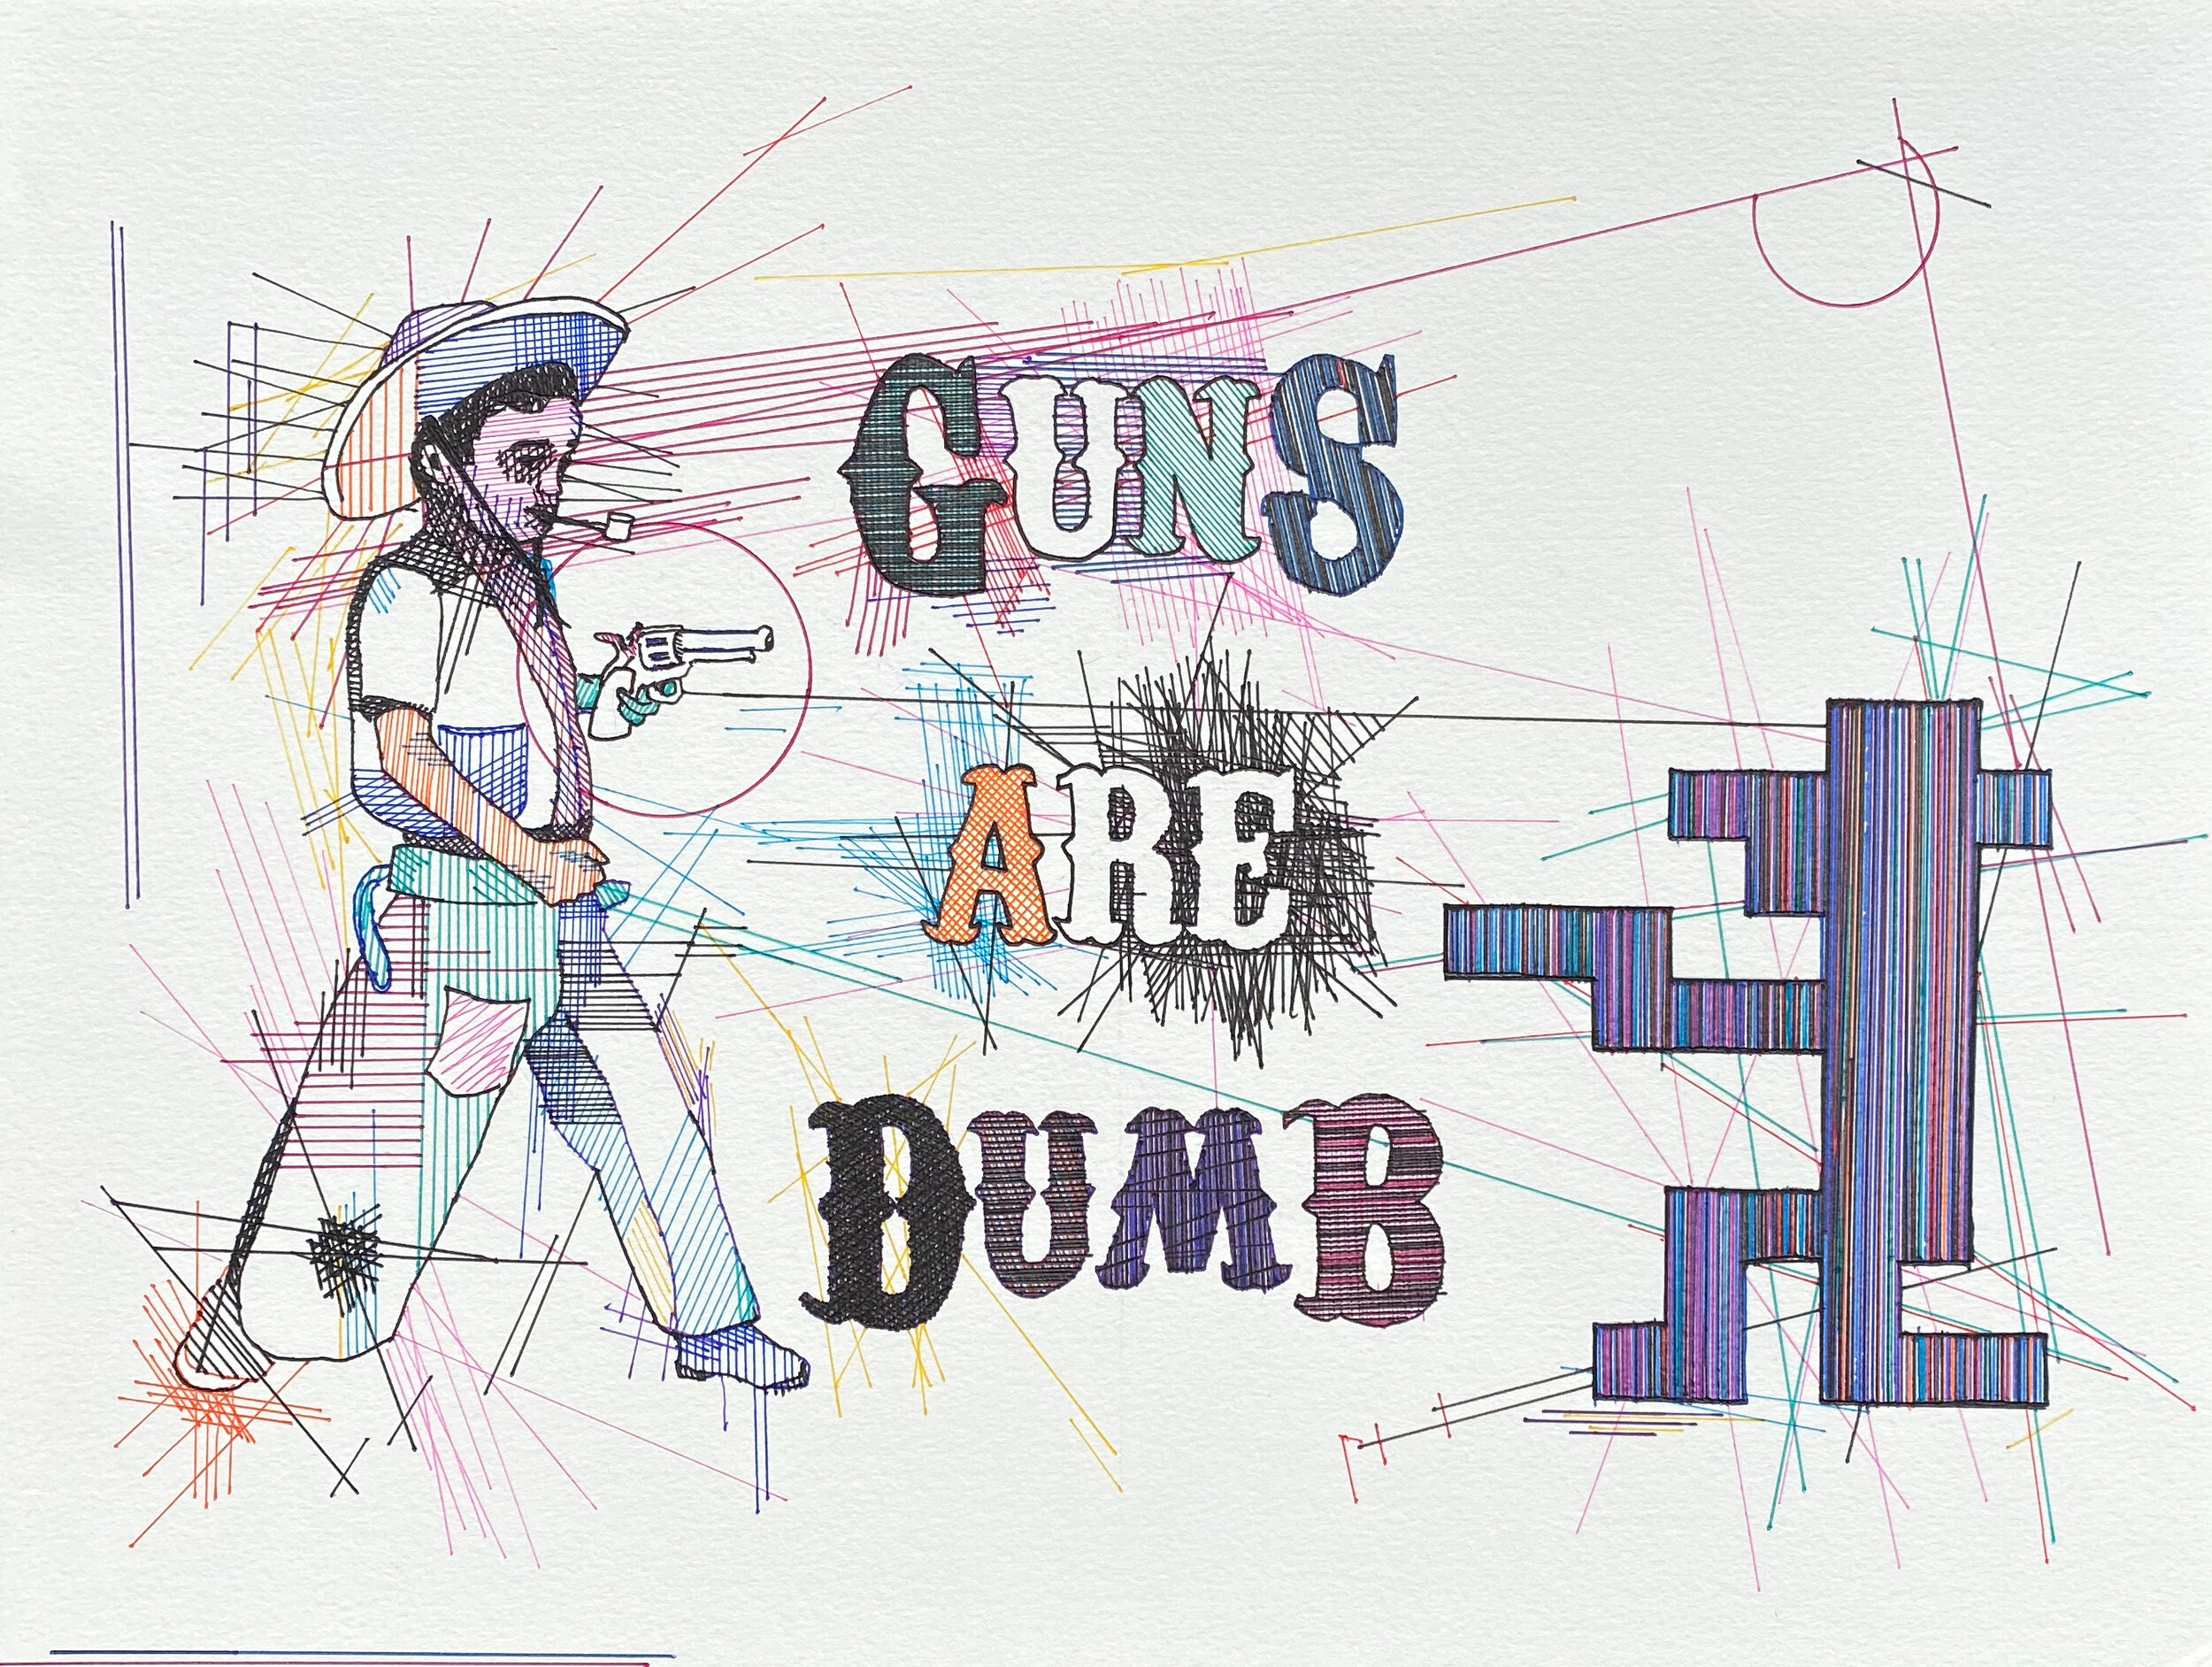 Guns are Dumb, ink on paper, 12"x16"